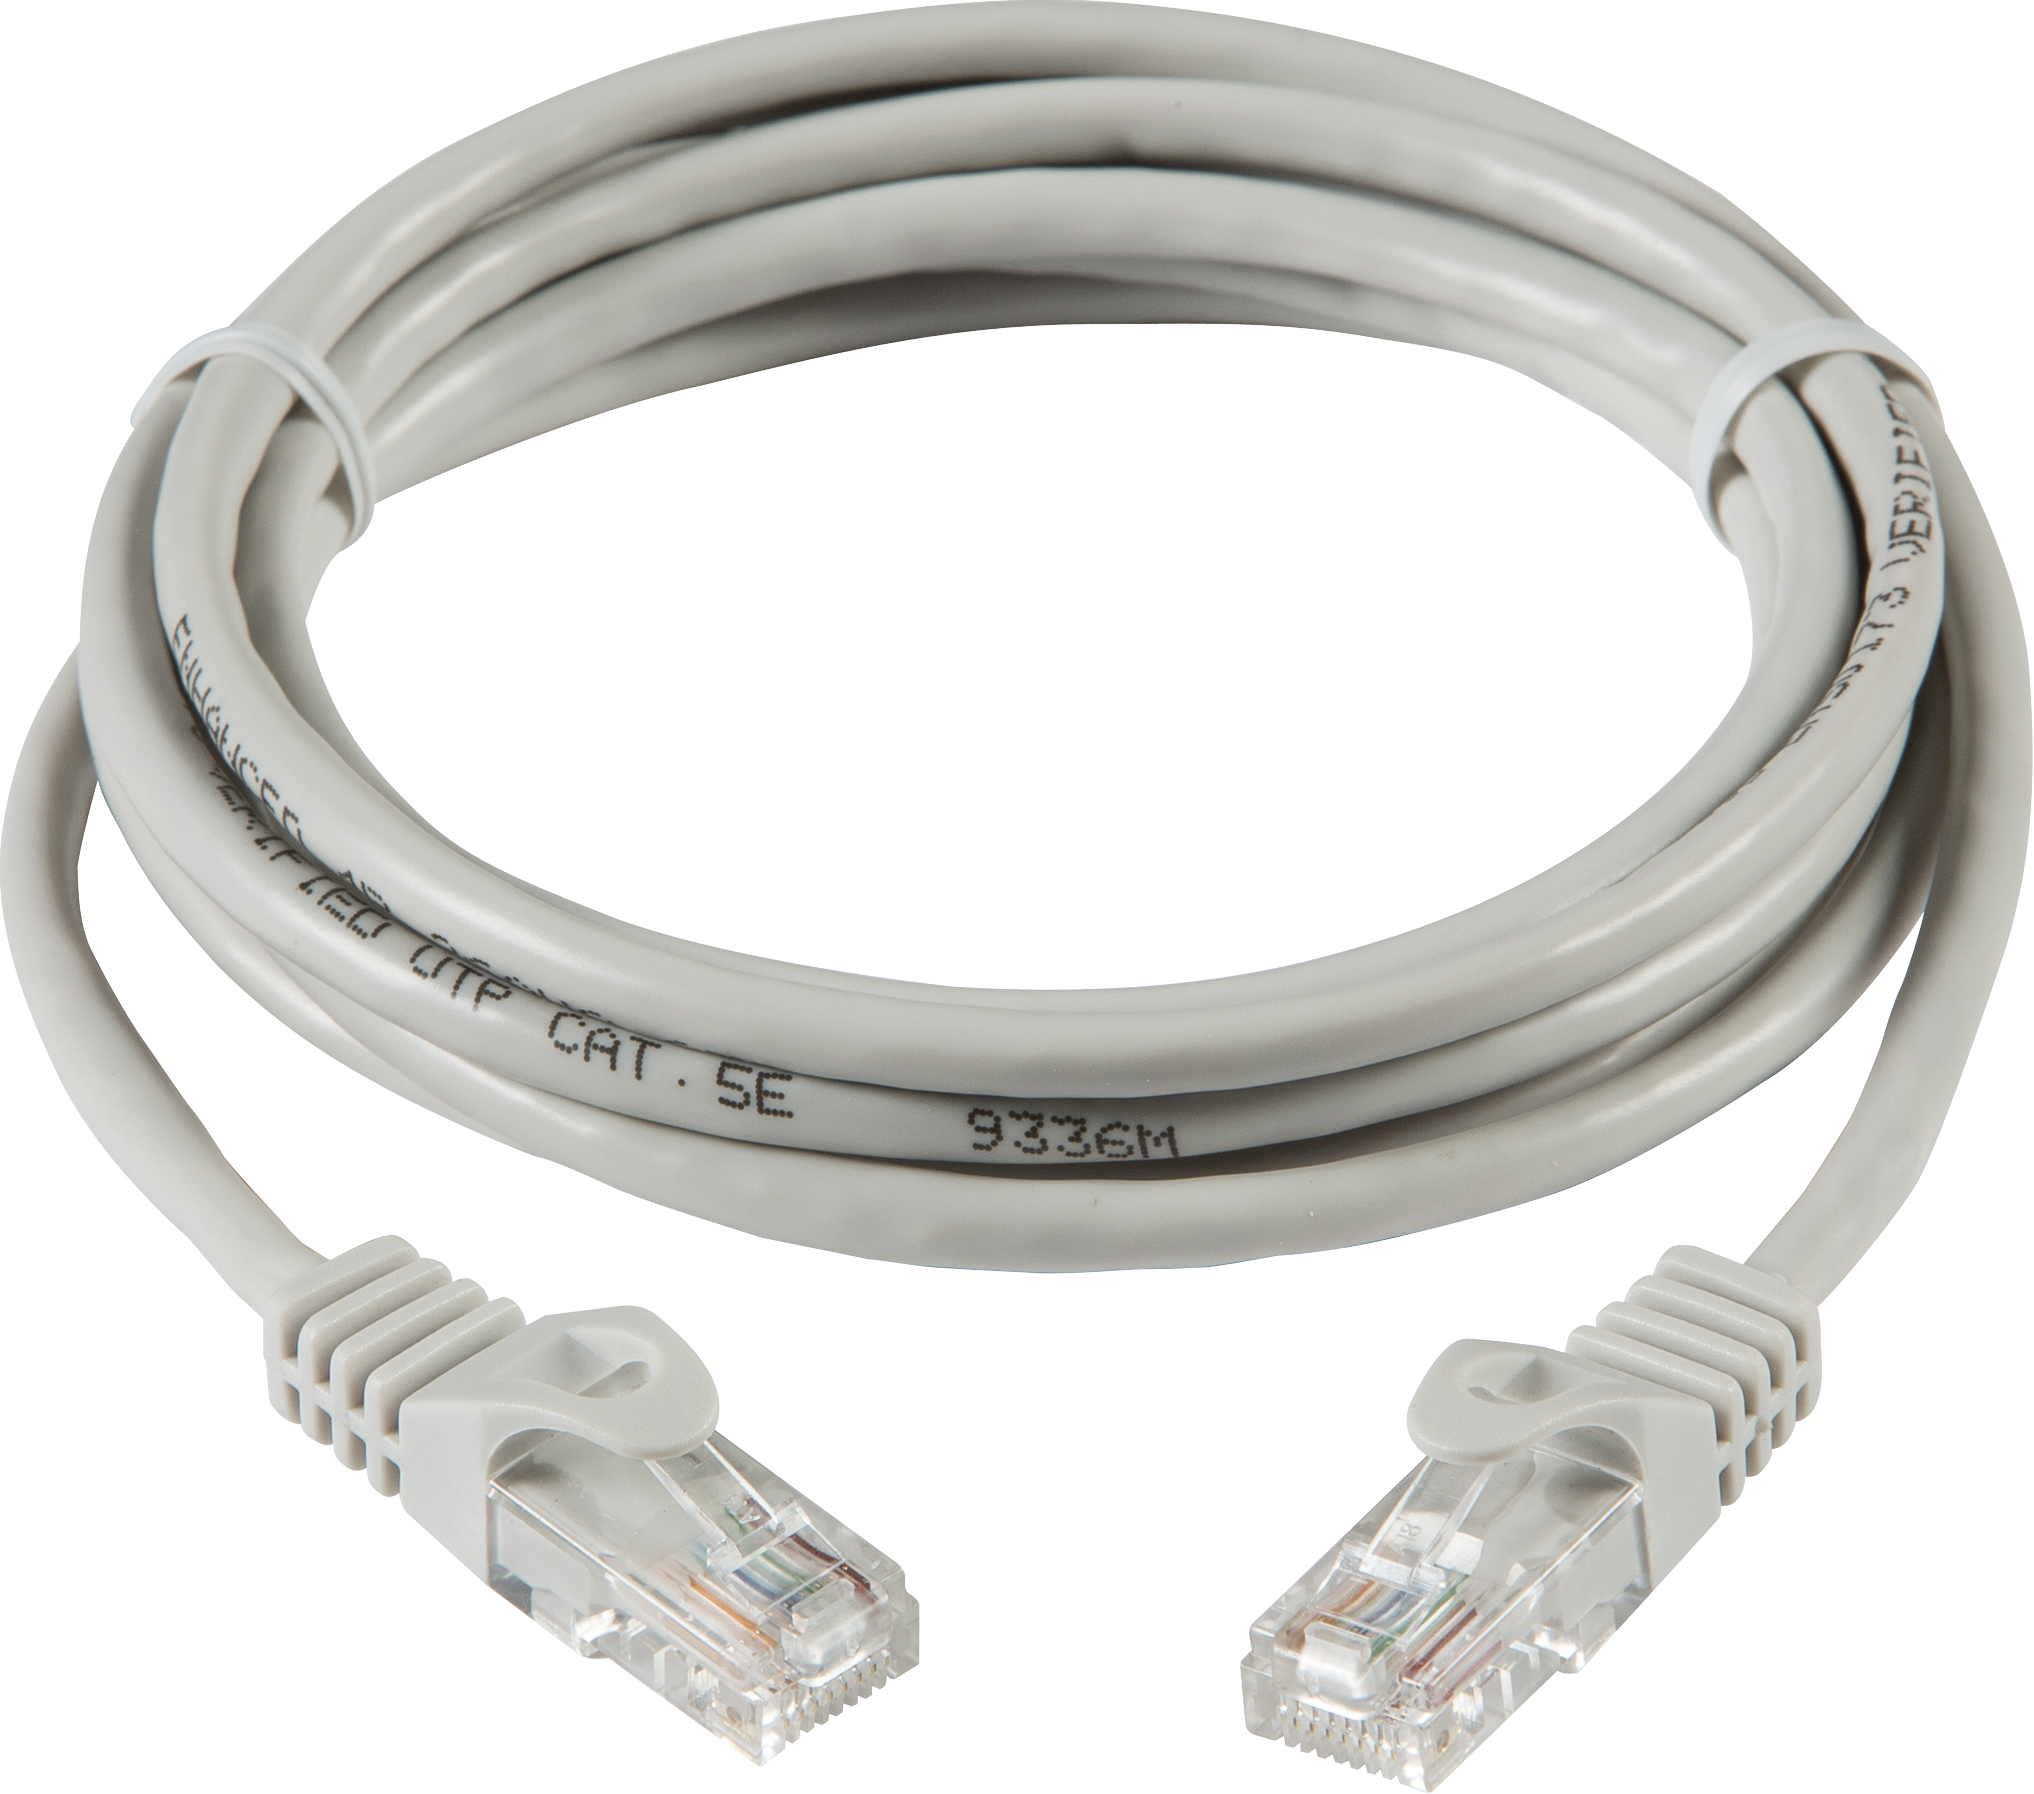 1m UTP CAT5e Networking Cable - Grey - NETC51M 